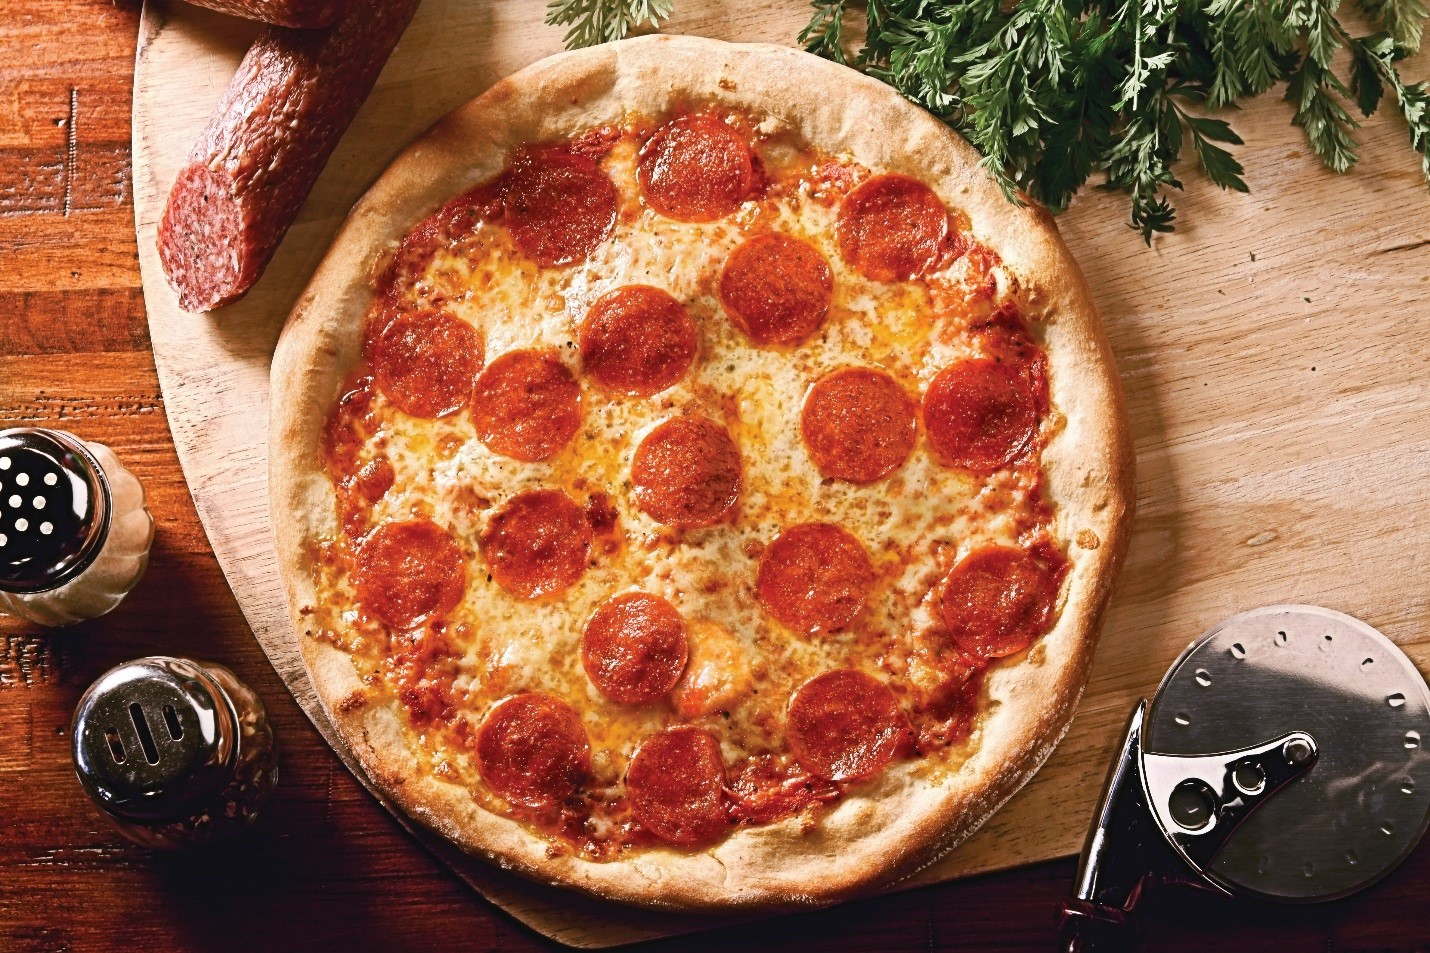 Russo's New York Pizzeria Celebrates National Pepperoni Pizza Day with